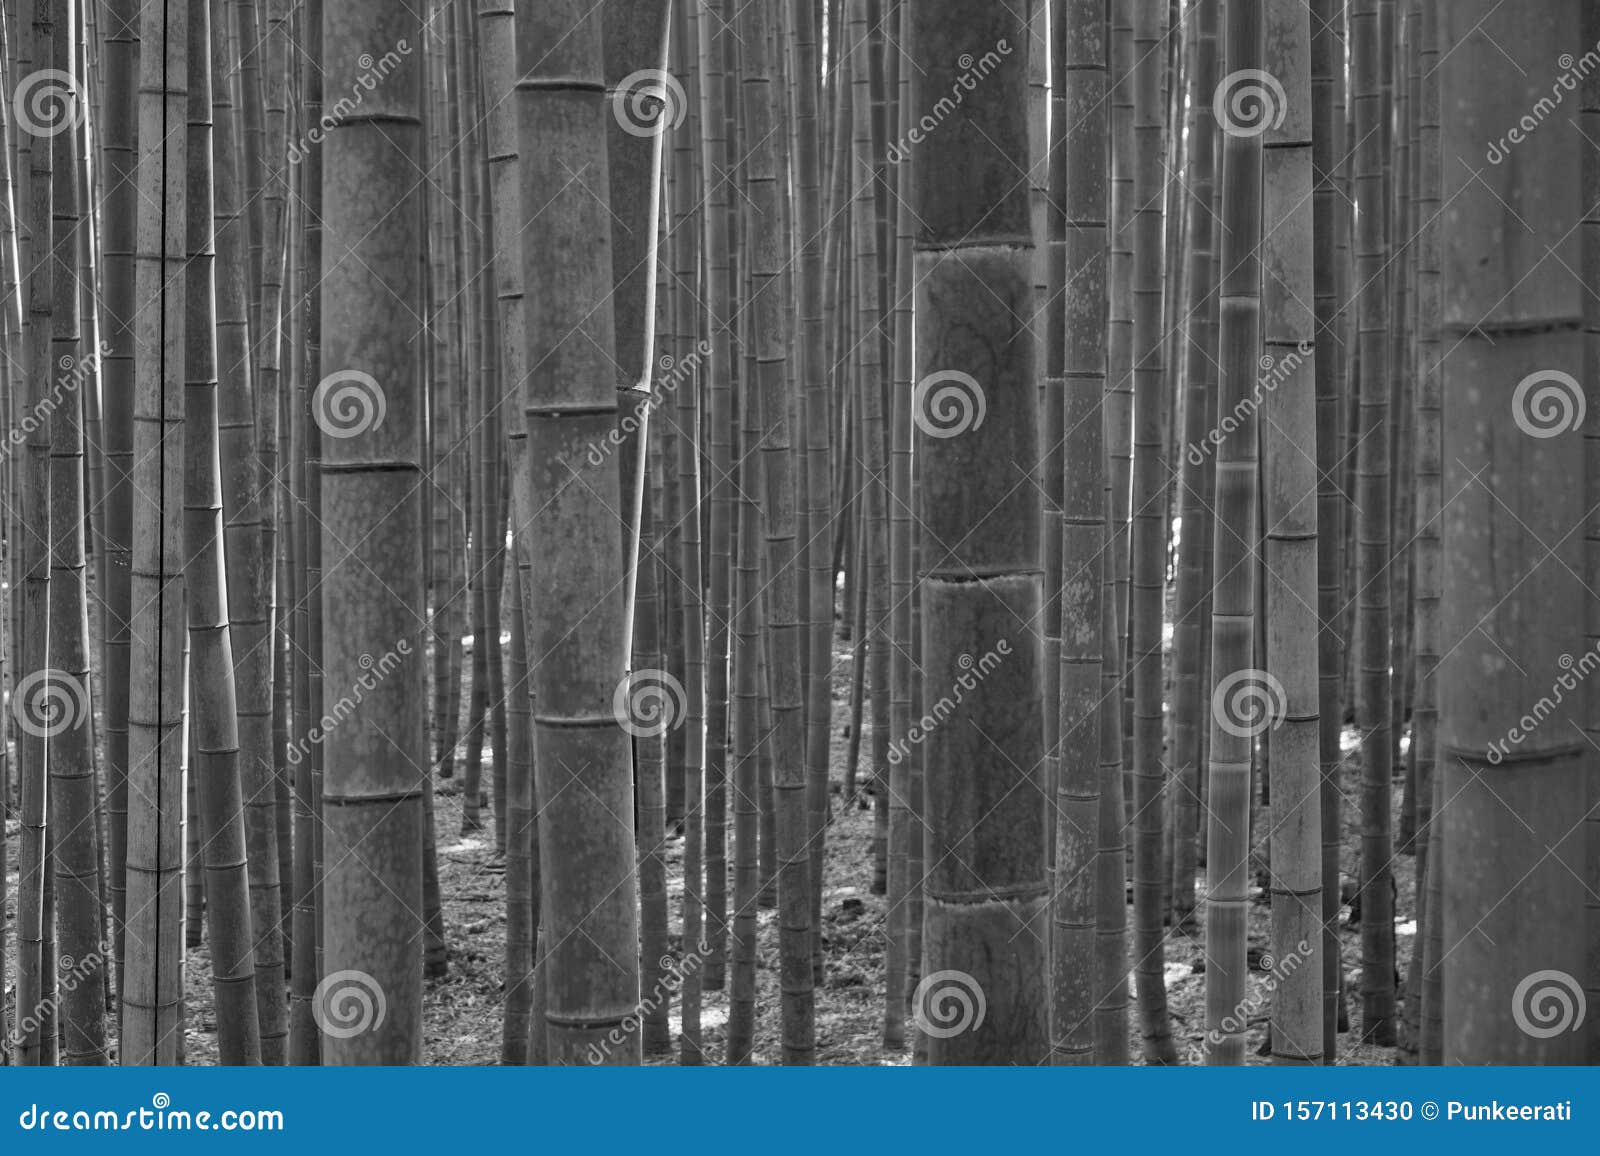 Blurred Bamboo in Bamboo Forest in Black and White Style Stock Photo ...